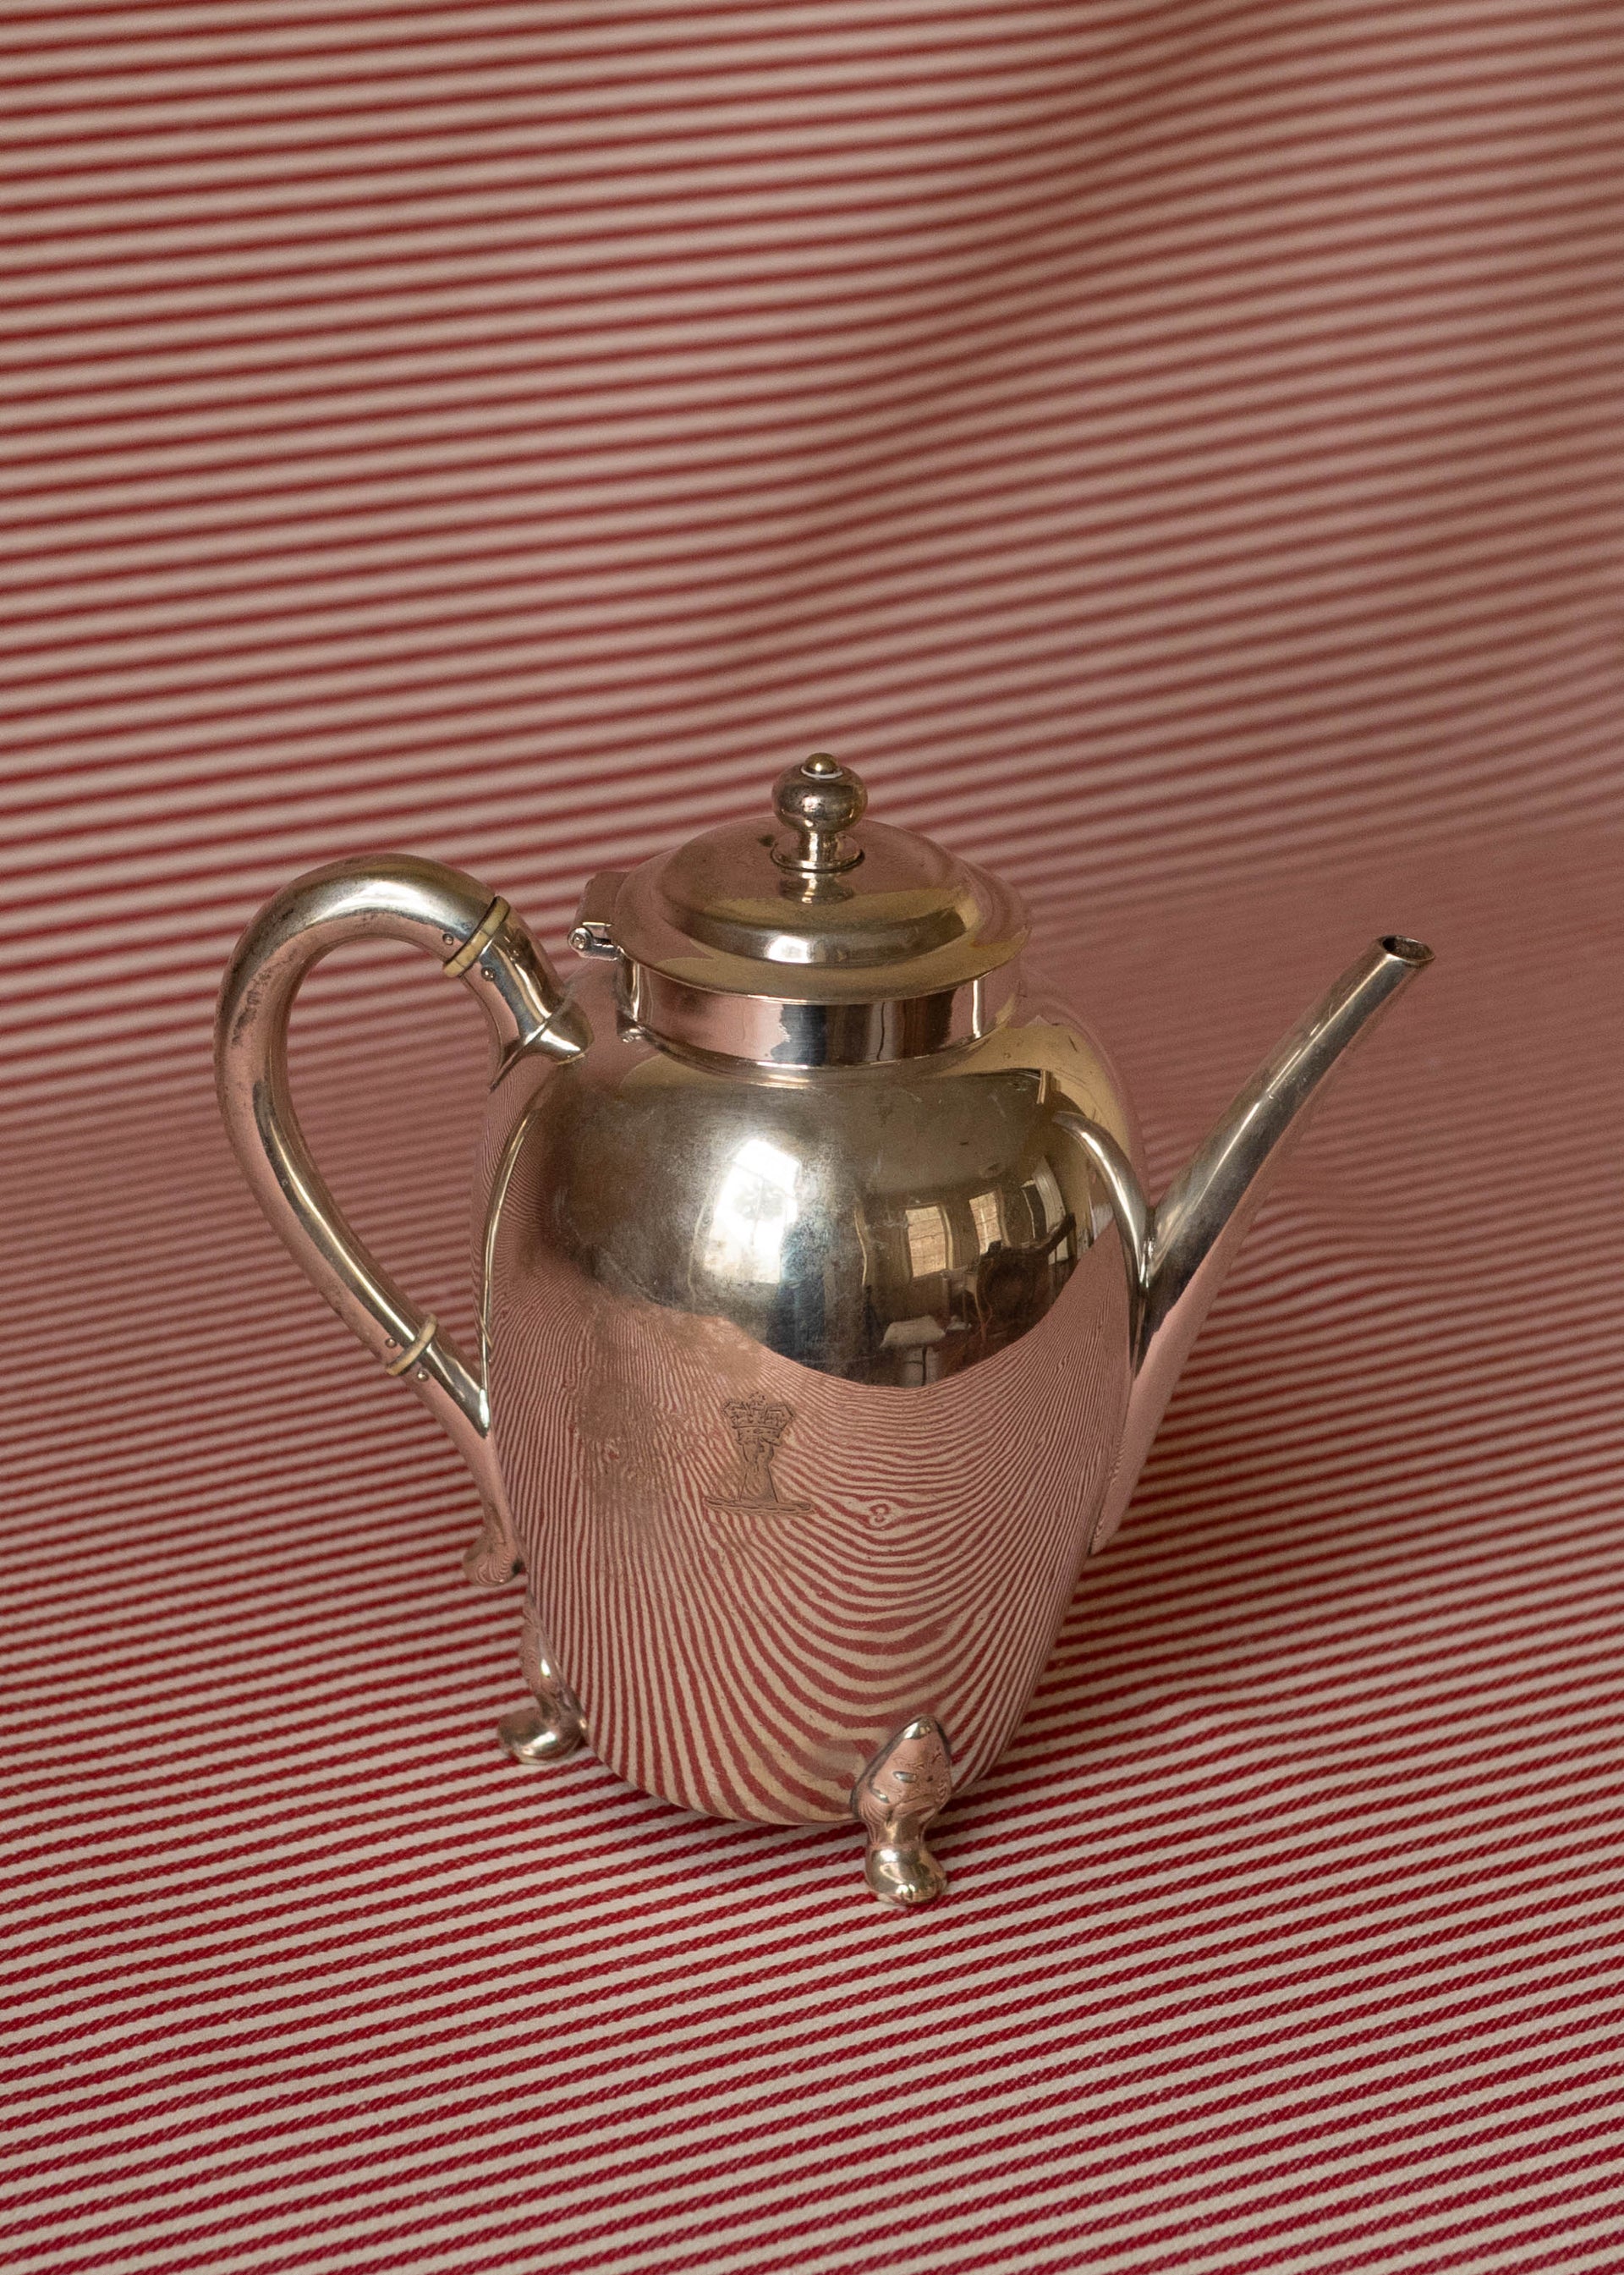 Silver Plated Teapot